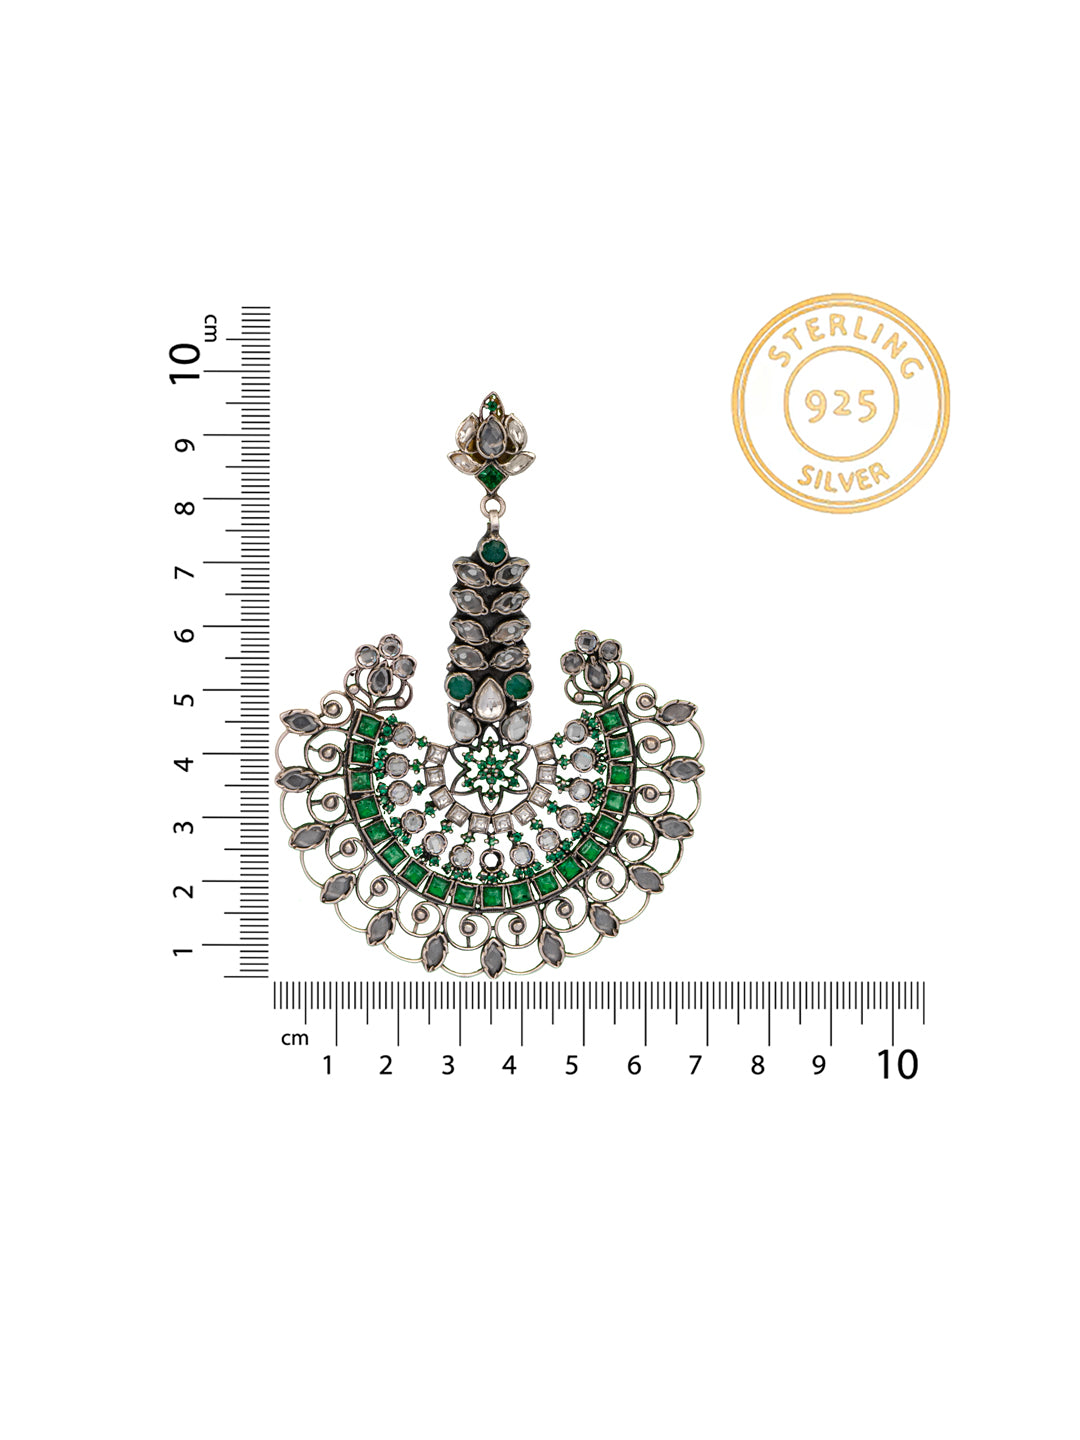 925 Sterling Silver Green and White Kundan Statement Earringss